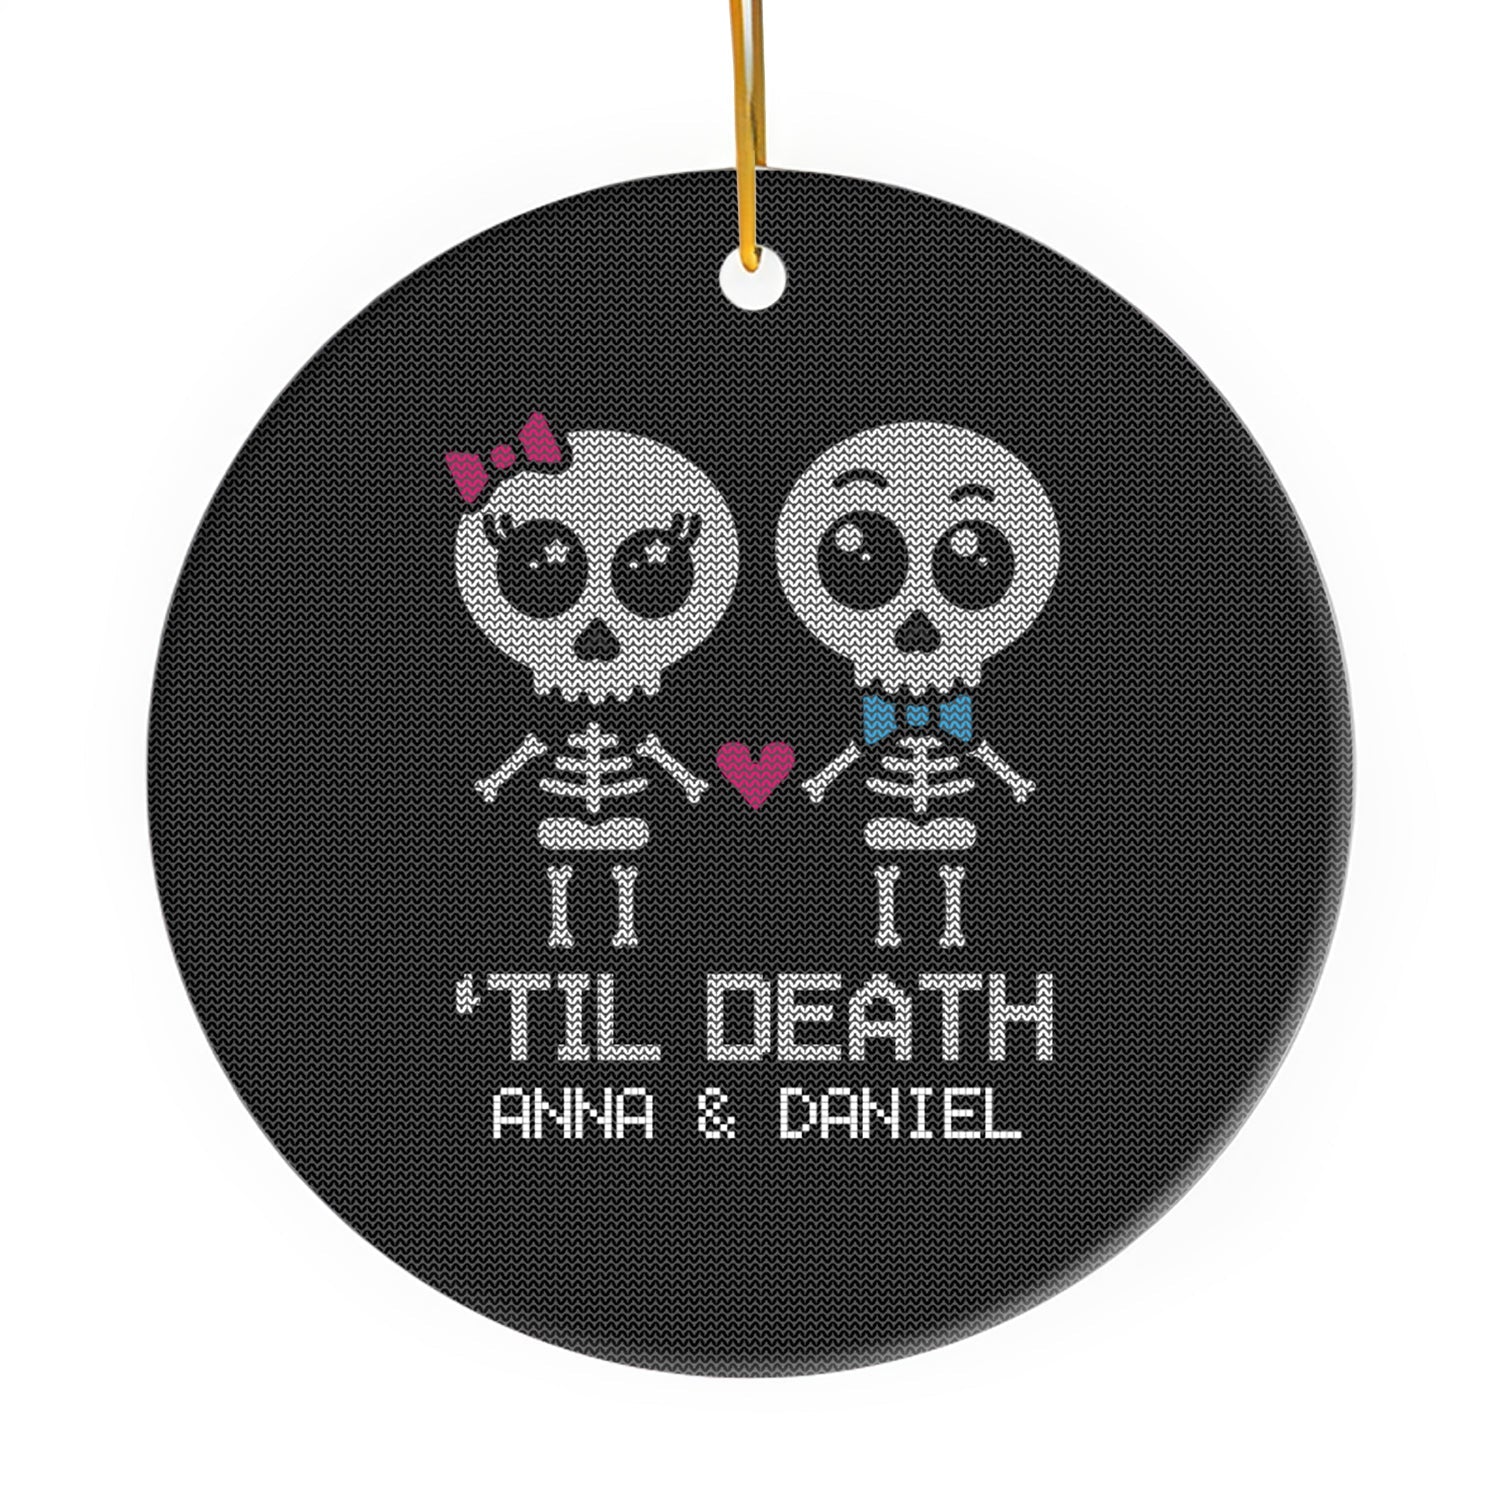 Til Death - Personalized Anniversary or Halloween gift for Boyfriend or Girlfriend - Custom Circle Ceramic Ornament - MyMindfulGifts